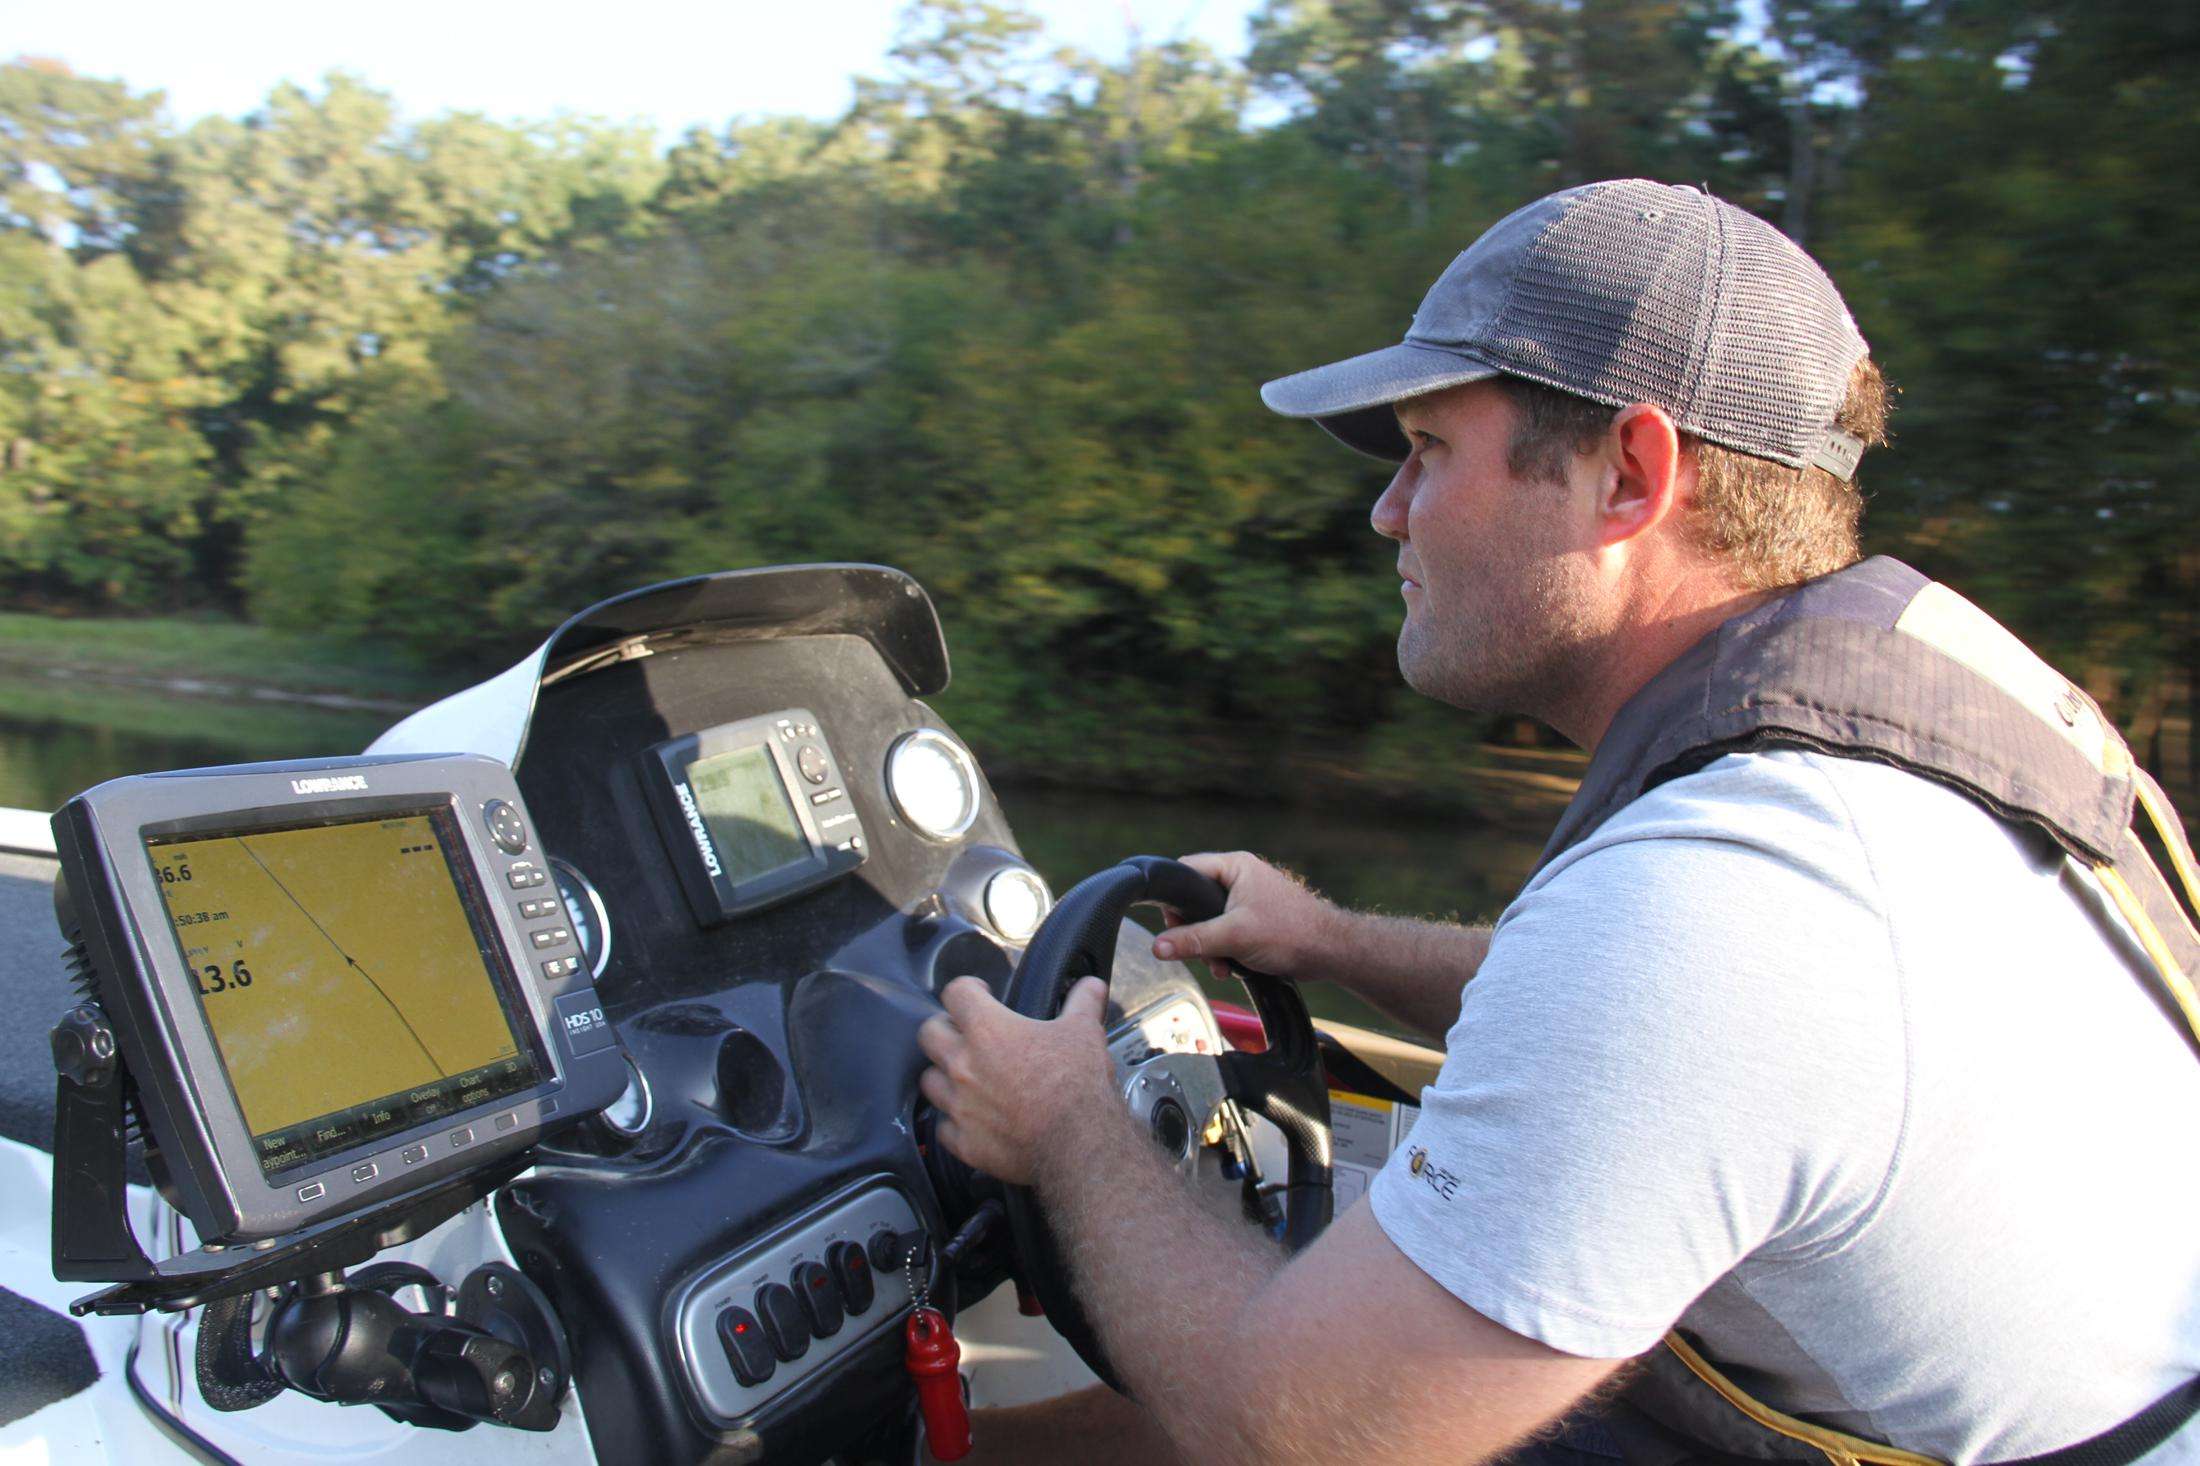 Brett Preuett was my boat driver for the day, and this guy can run a boat through skinny bayou waters with ease. His first season on the Elite Series begins in 2016, and judging by the way he runs his Triton/Mercury, heâll do just fine.